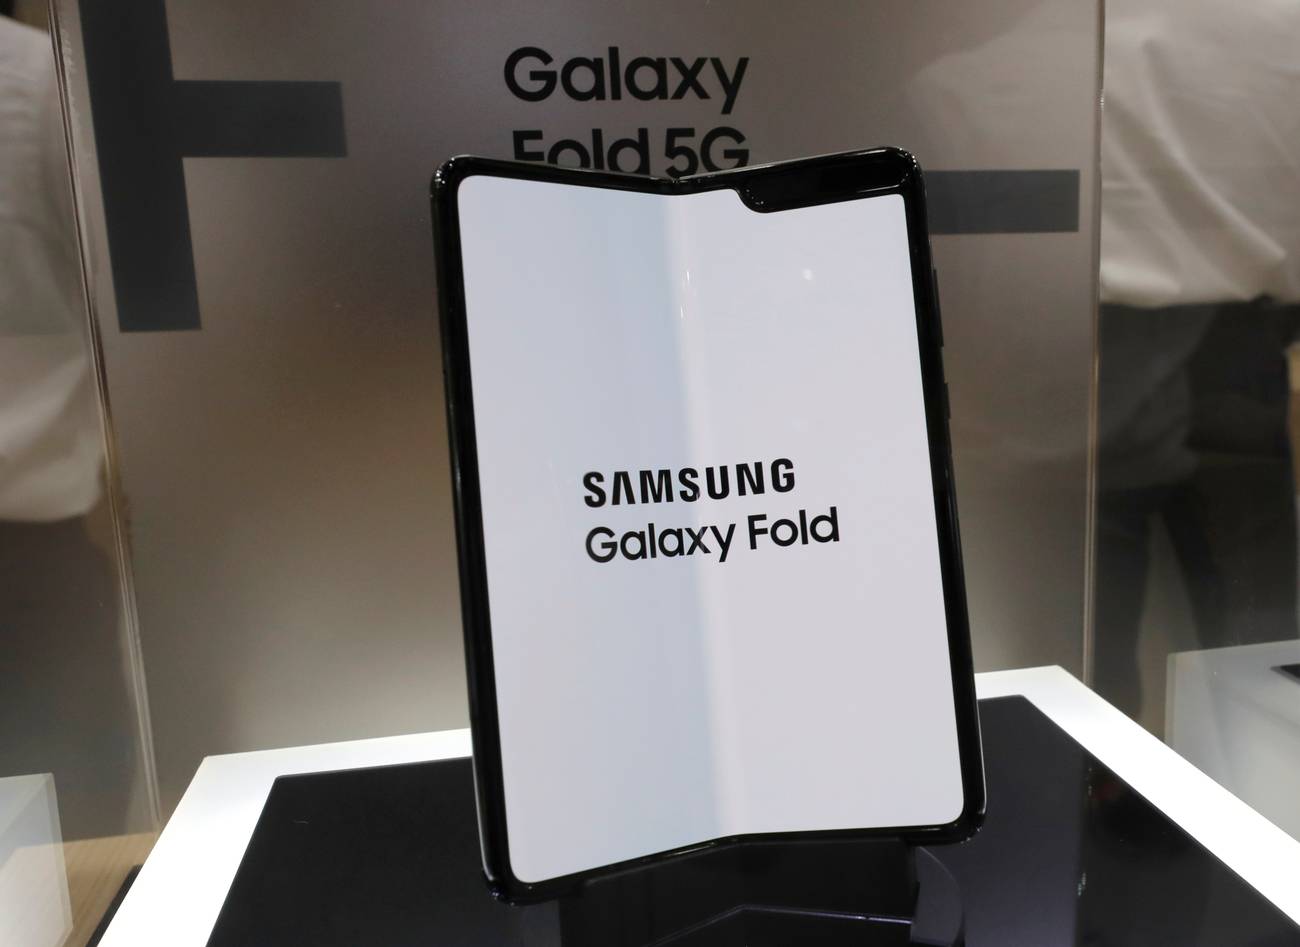 Now we believe foul news about Samsung’s Galaxy Fold 2 initiate